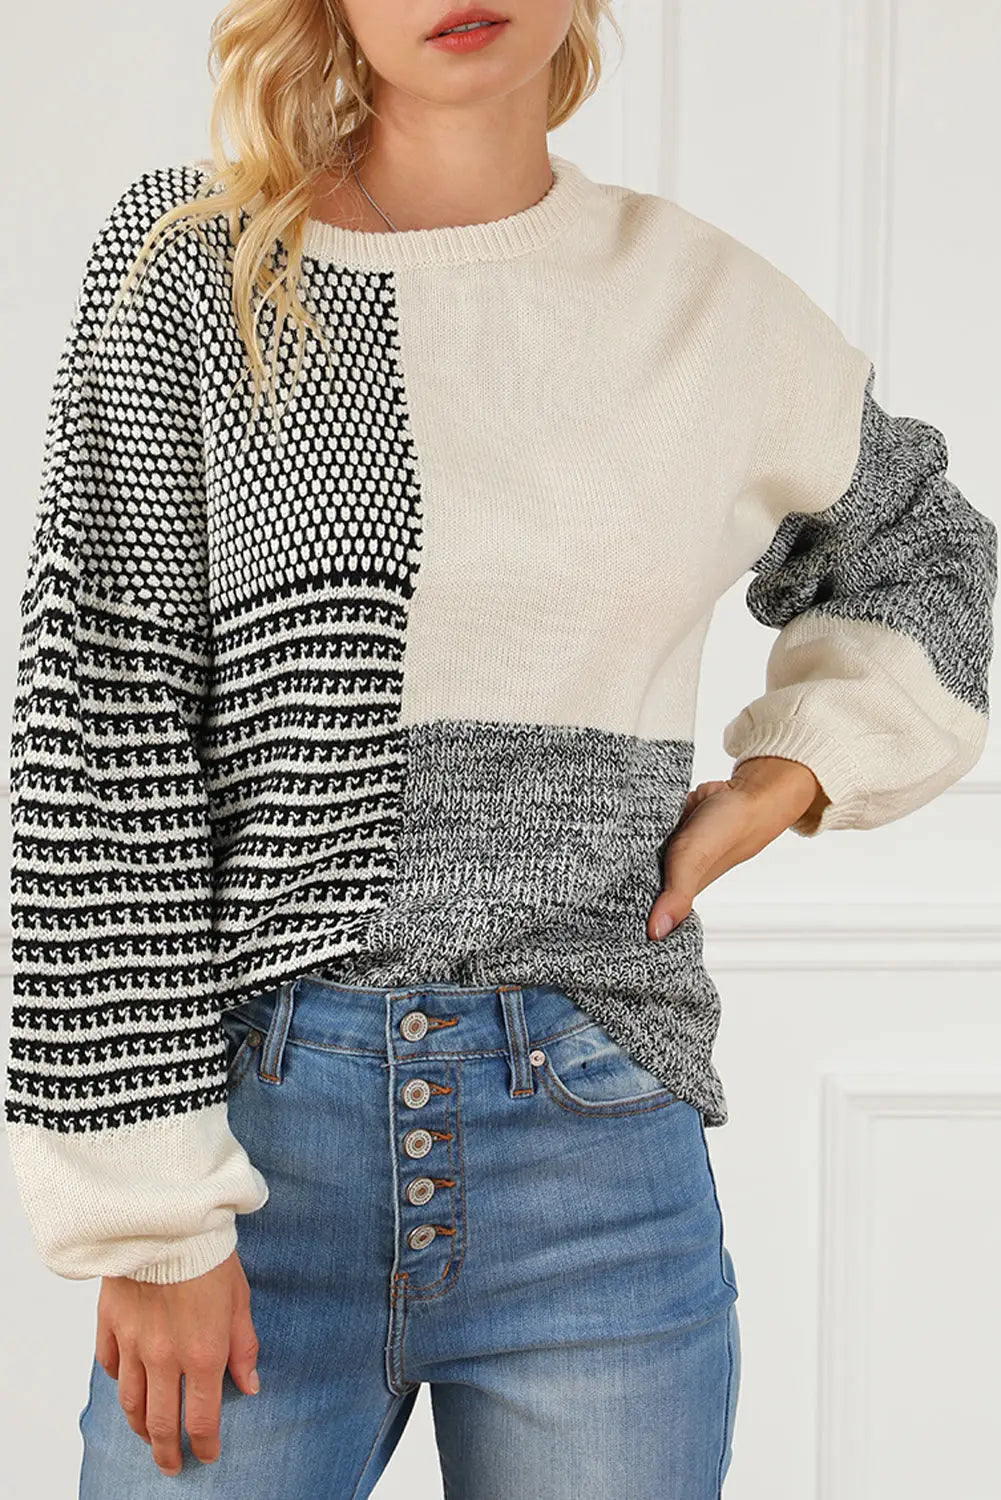 Black neutral colorblock tie back sweater - s / 100% acrylic - sweaters & cardigans